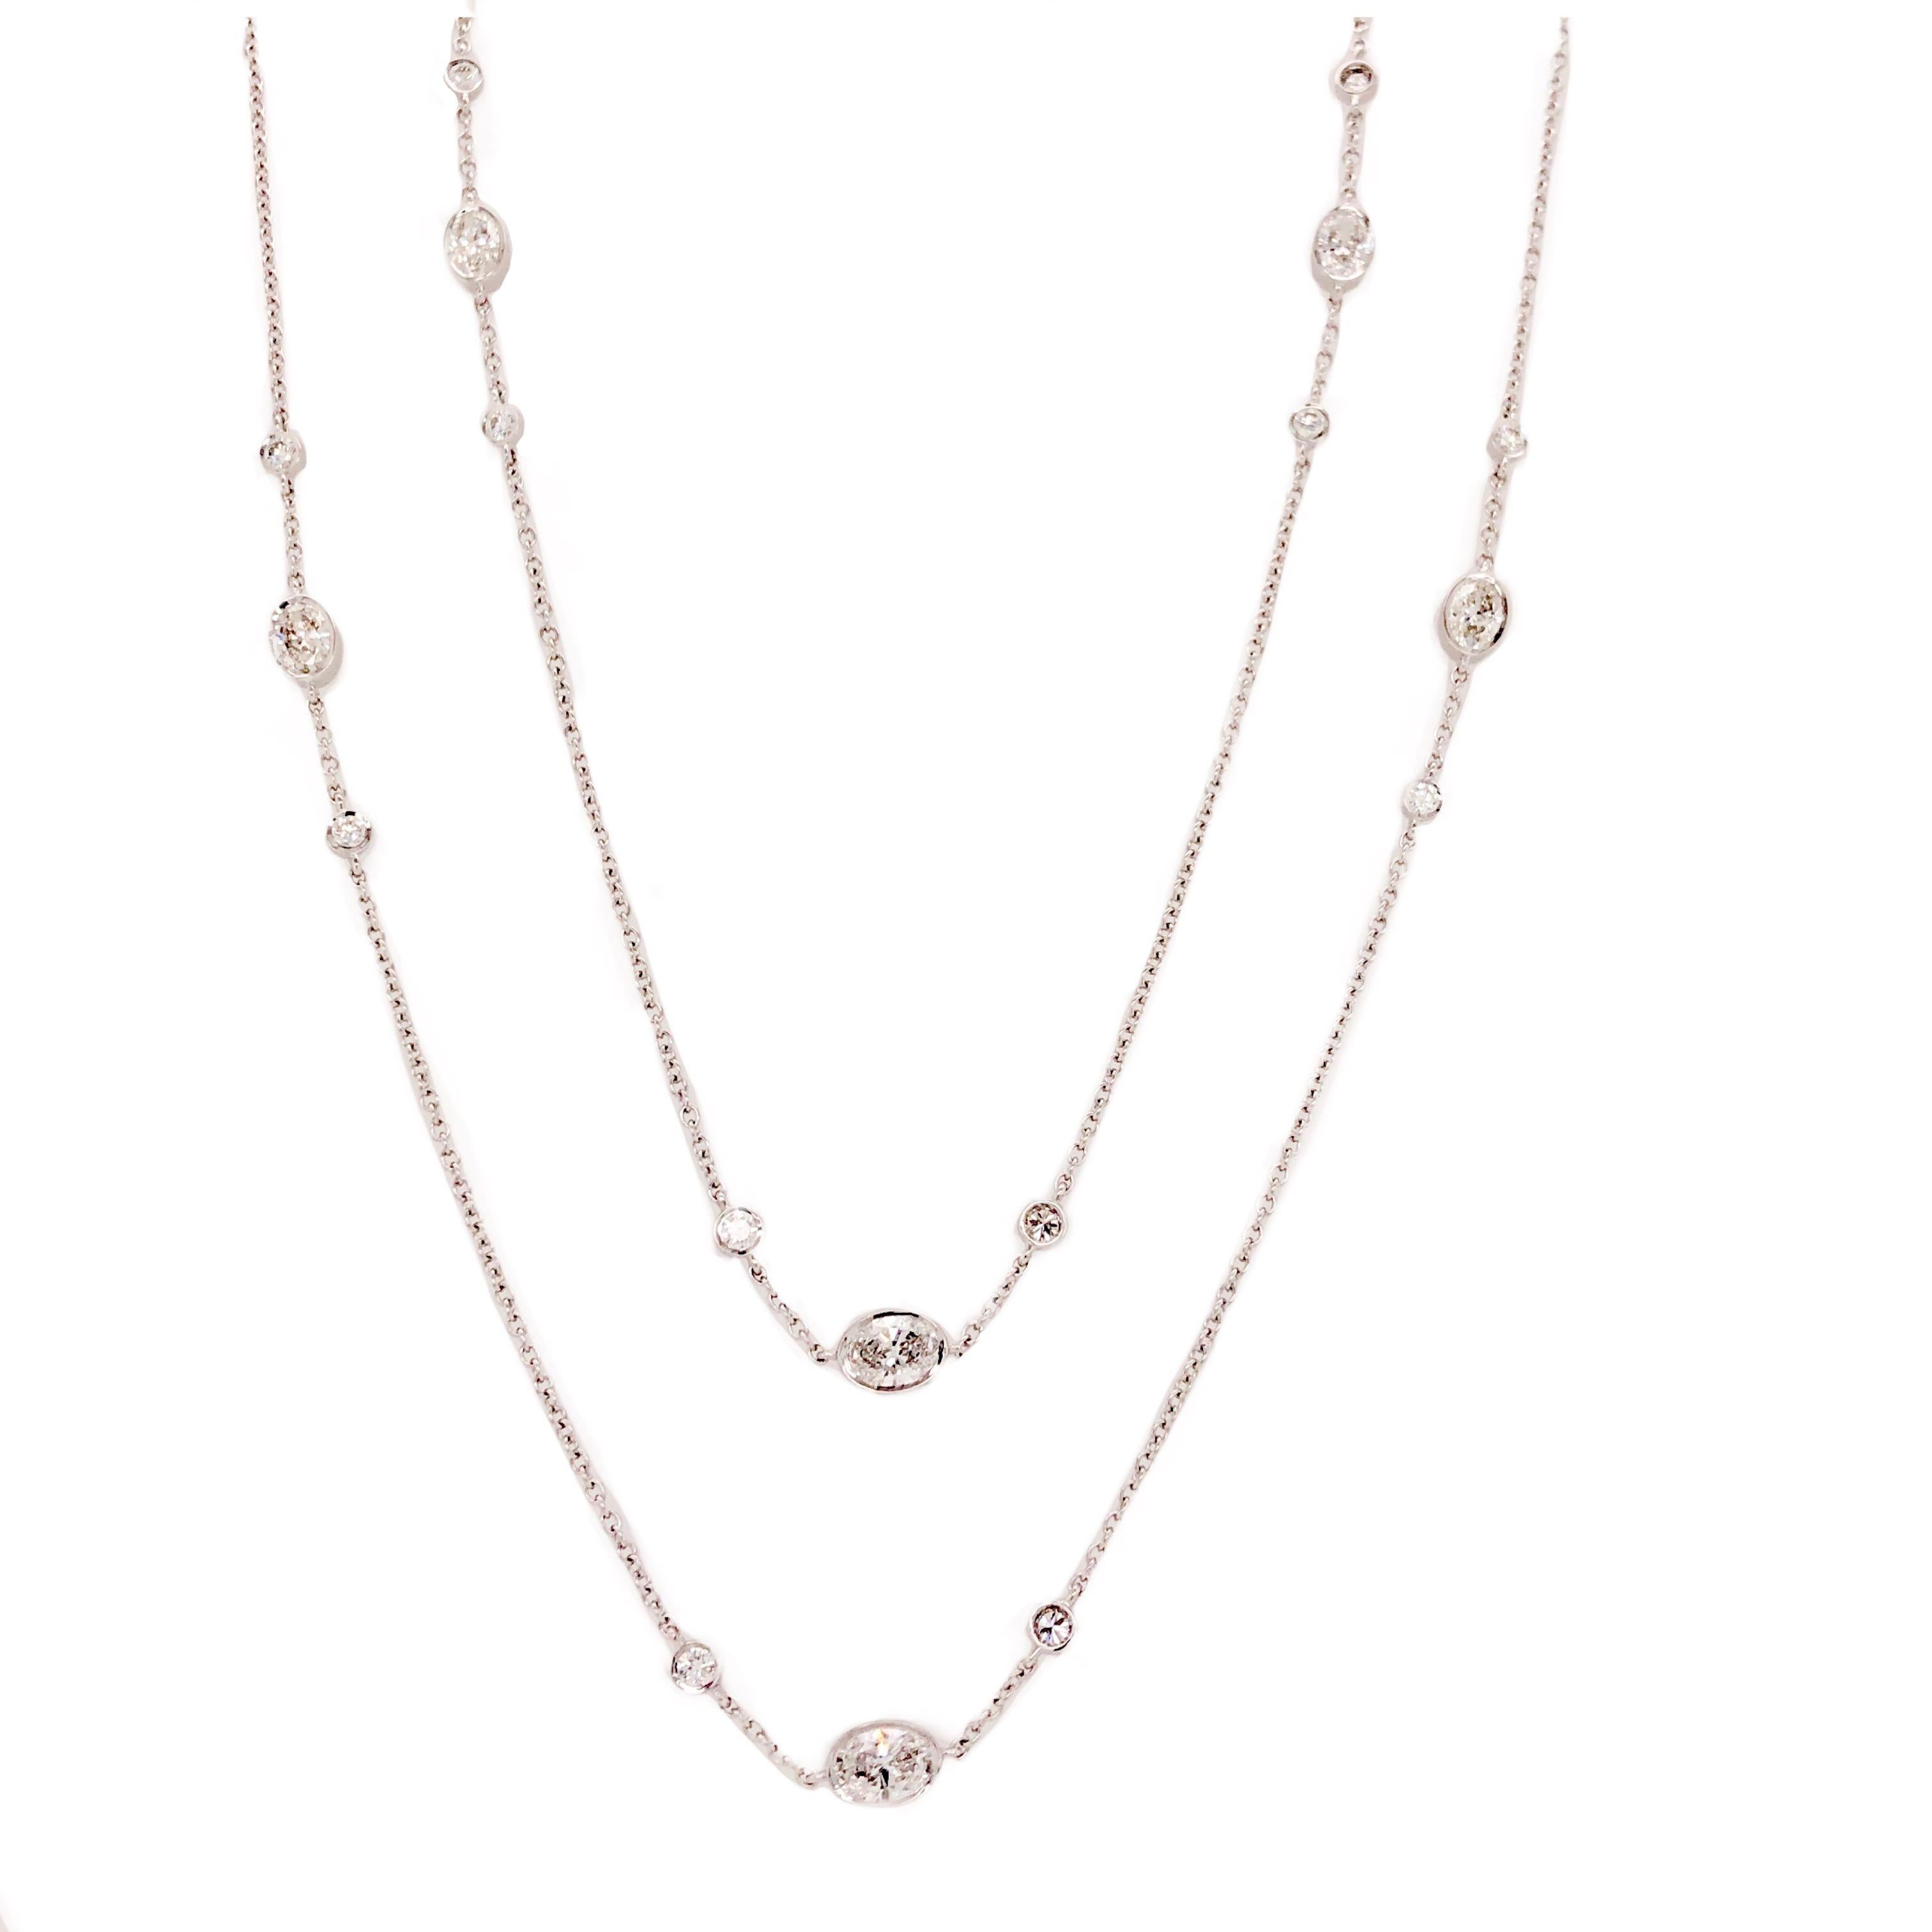 Memoire Diamonds By The Yard Necklace Oval and Round Diamond Chain 2.27 ctw 18K W/G. This Memoire 18K White Gold Diamonds By The Yard Chain Necklace features 24 Oval and Round Brilliant Diamonds equalling 2.27 Carats in Total Weight. These Diamonds